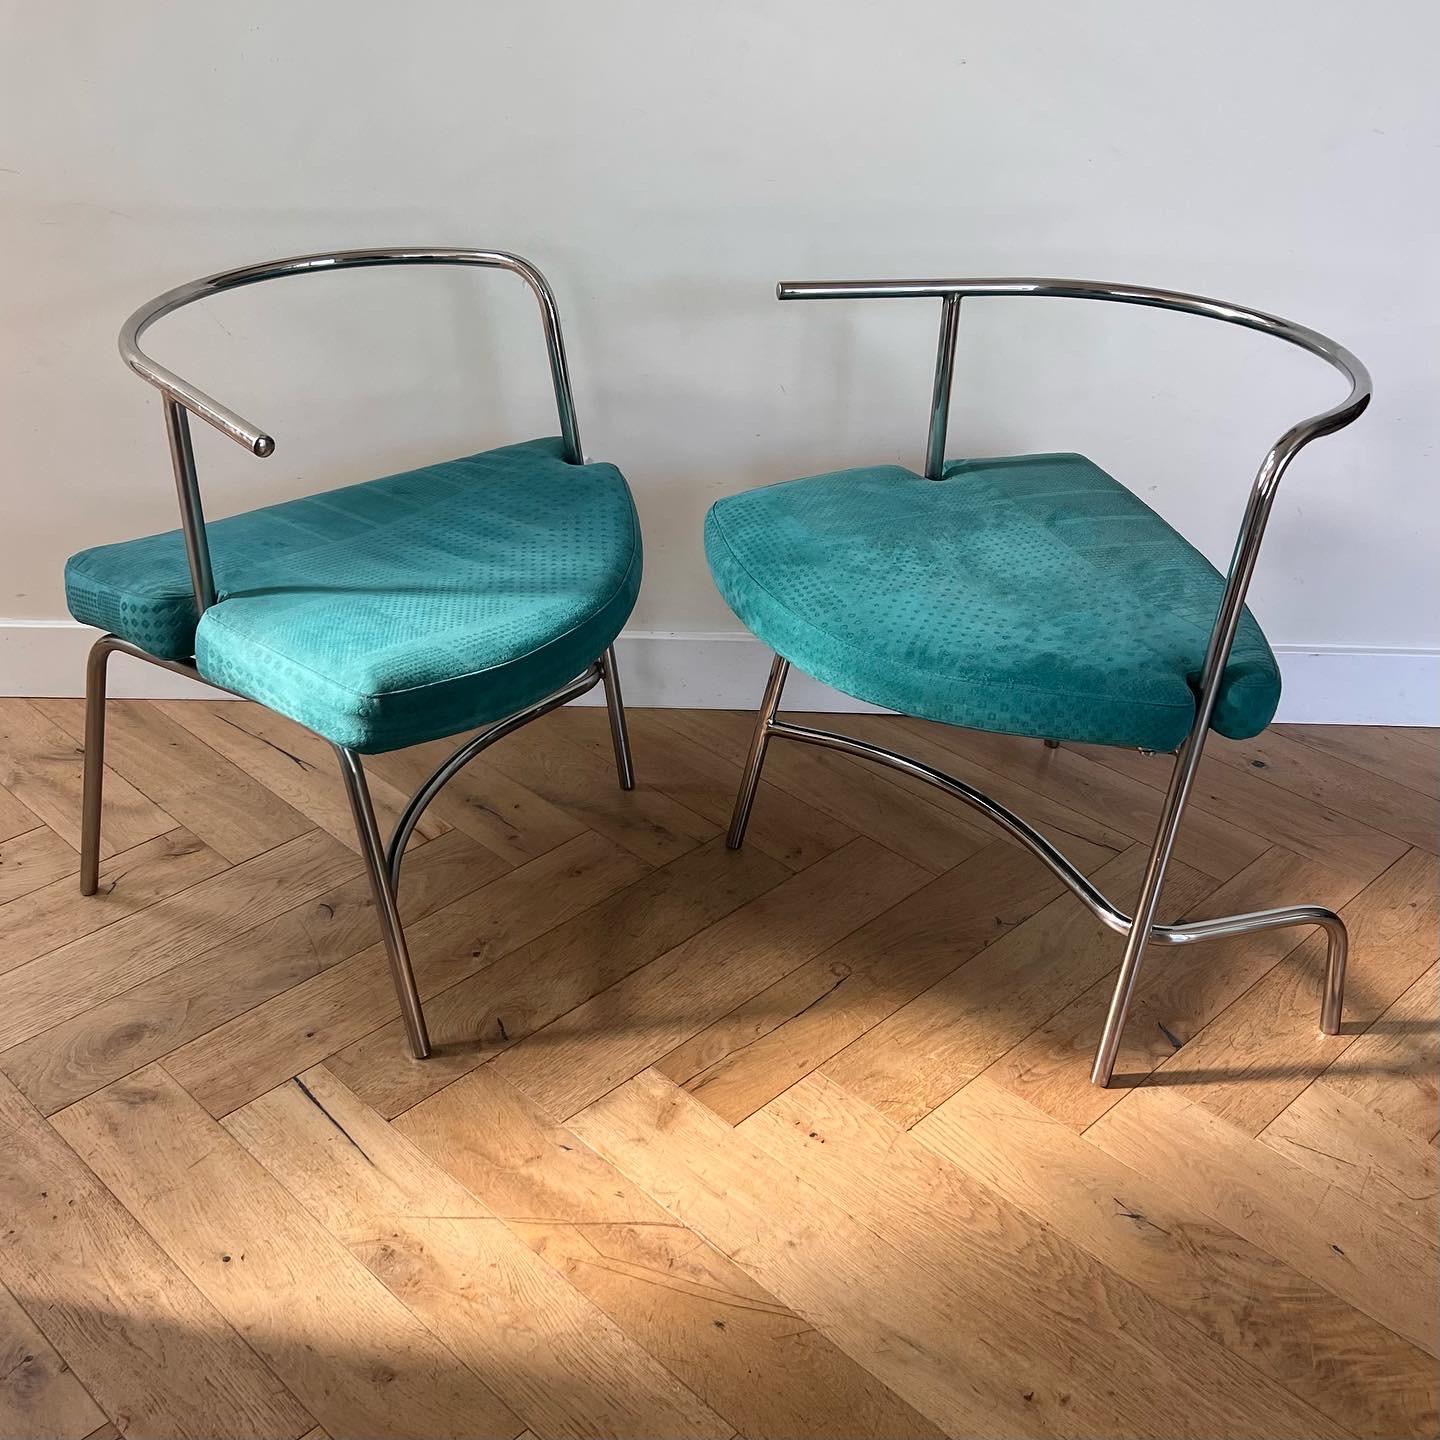 Pair of Modernist Italian Geometric Armchairs, C 1970 In Good Condition For Sale In View Park, CA